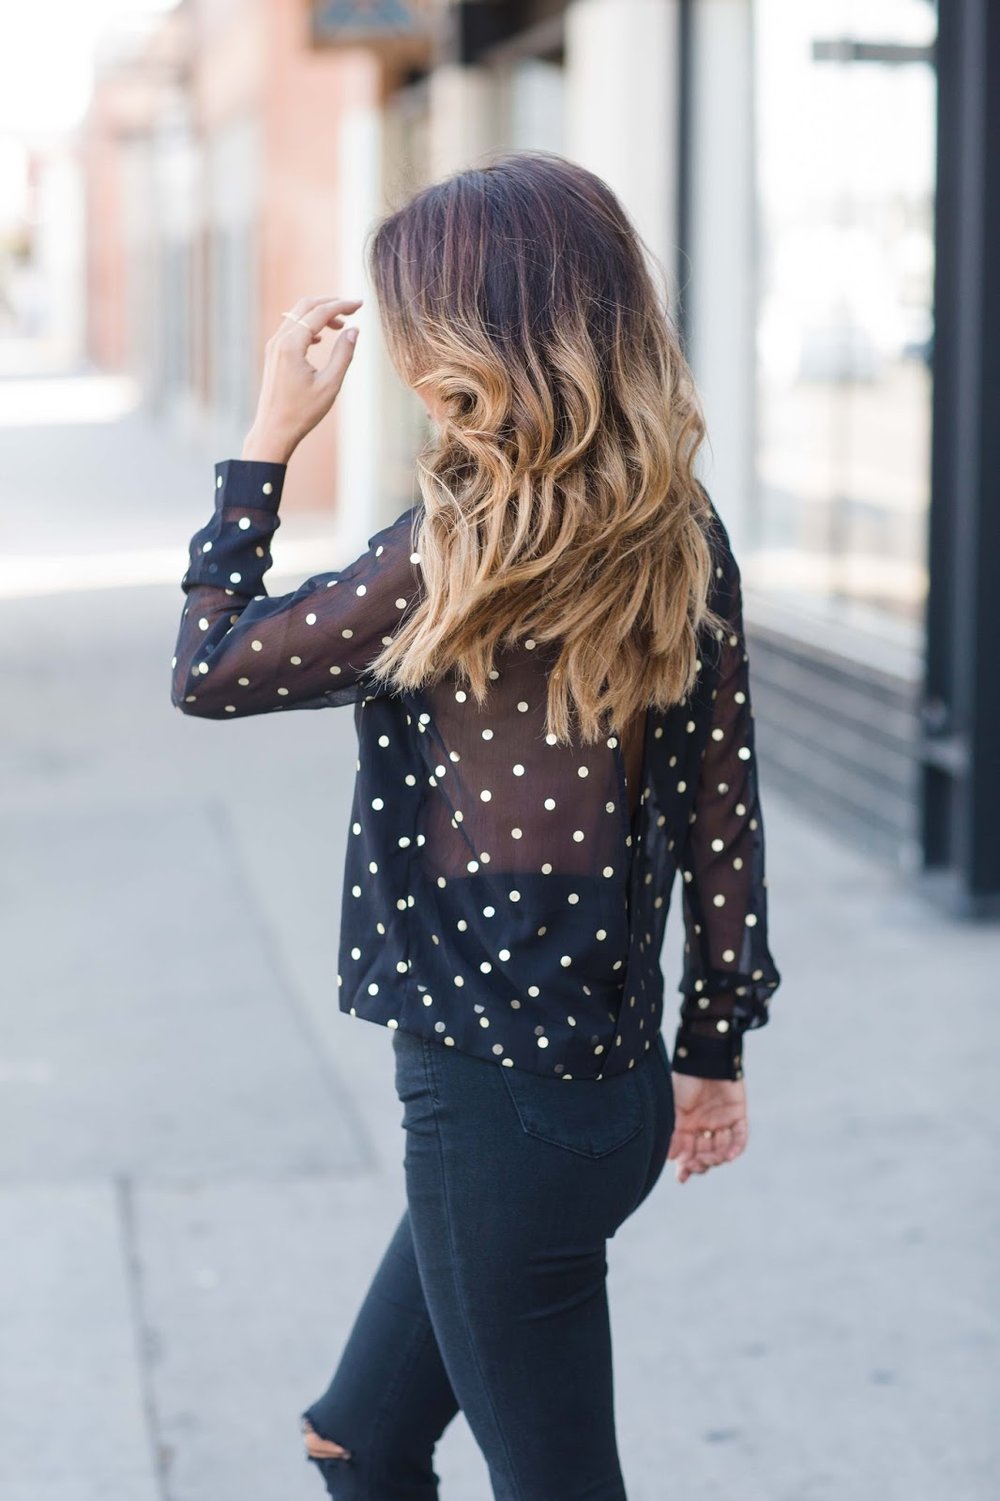 how to wear festive holiday top, holiday outfit ideas, gold polka dot top